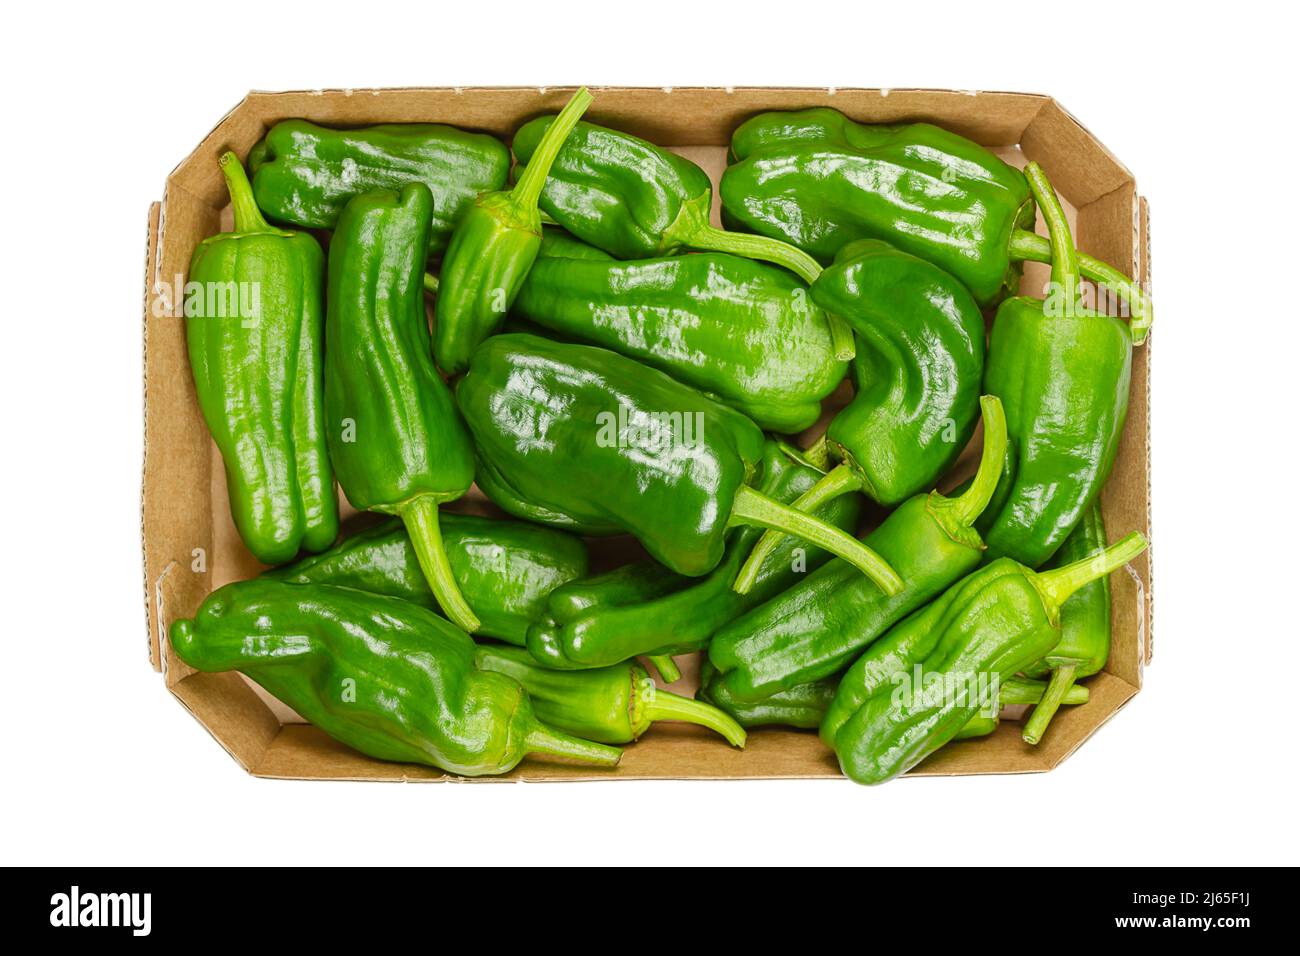 Raw Padron peppers, also called Herbon peppers, in a cardboard tray. Variety of Capsicum annuum from the municipality of Padron in northwestern Spain. Stock Photo